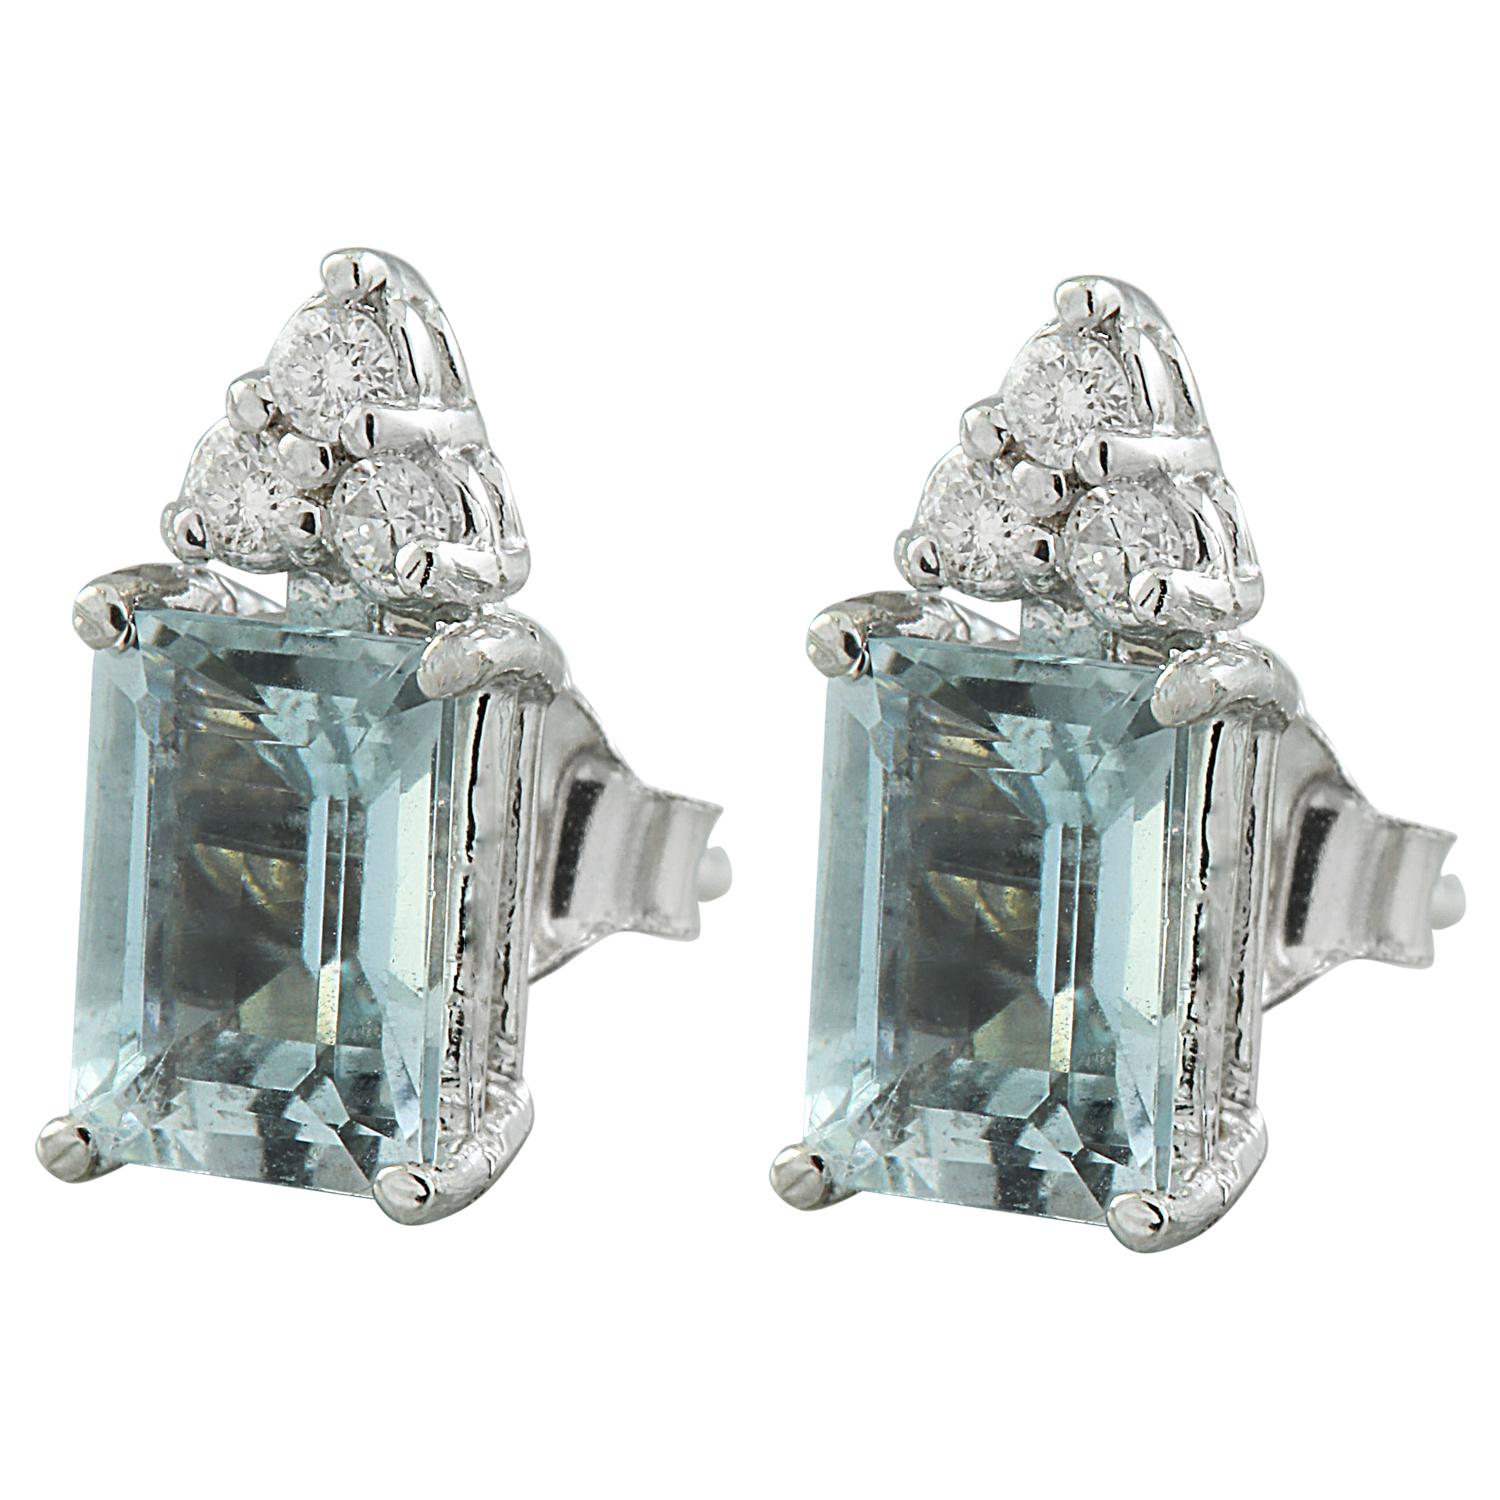 2.65 Carat Natural Aquamarine 14 Karat Solid White Gold Diamond Earrings
Stamped: 14K 
Total Earrings Weight: 1.5 Grams 
Aquamarine Weight: 2.50 Carat (7.00x5.00 Millimeters)  
Color: Blue 
Treatment: Heating
Diamond Weight: 0.15 Carat (F-G Color,